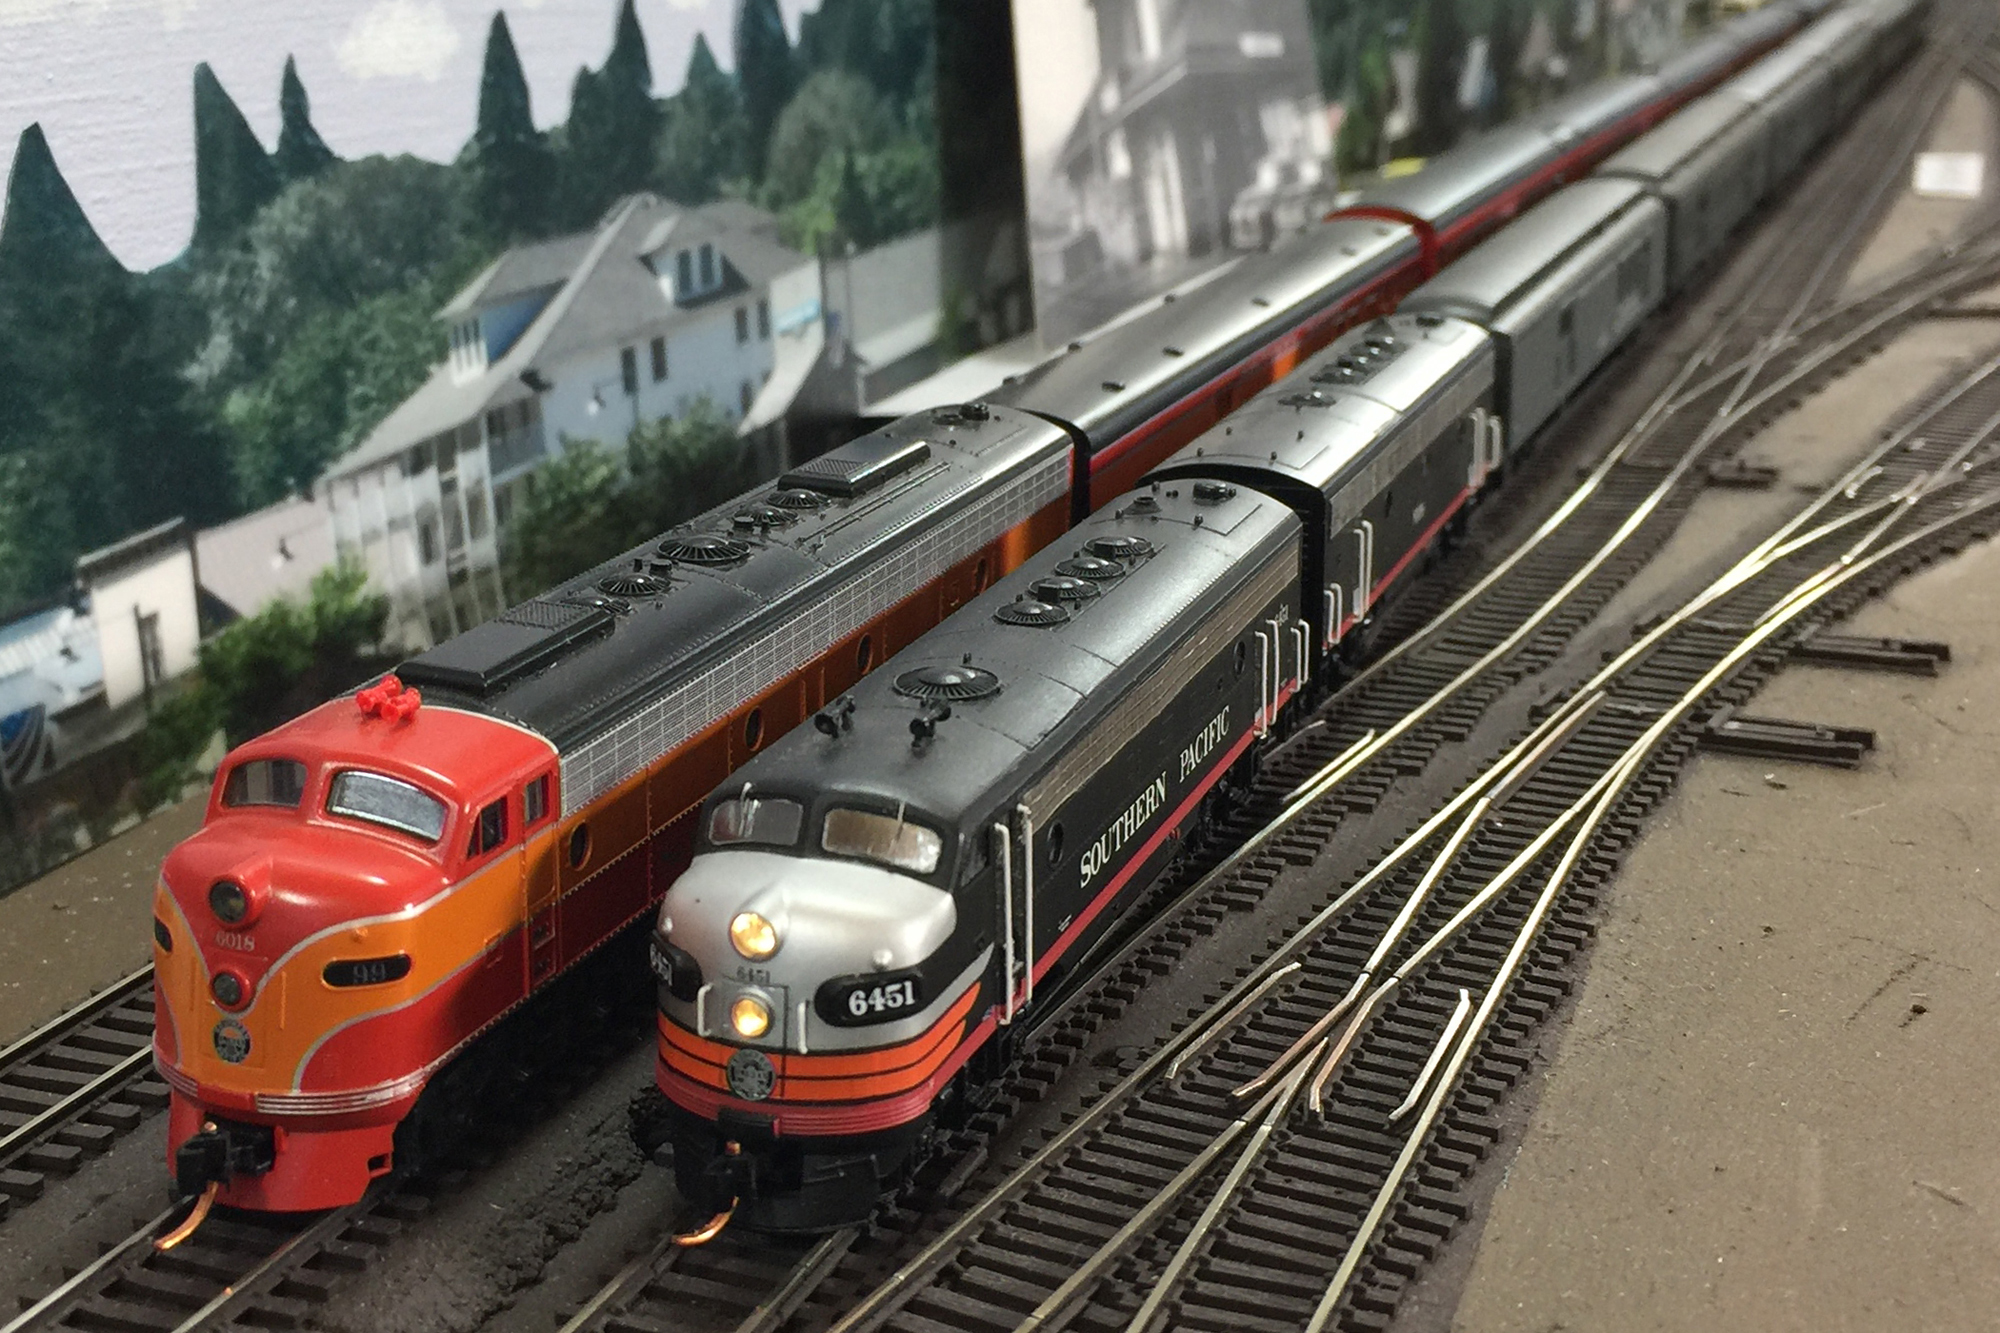 N Scale passenger trains and layout by Ryan Ryan Di Fede, San Diego Division member.